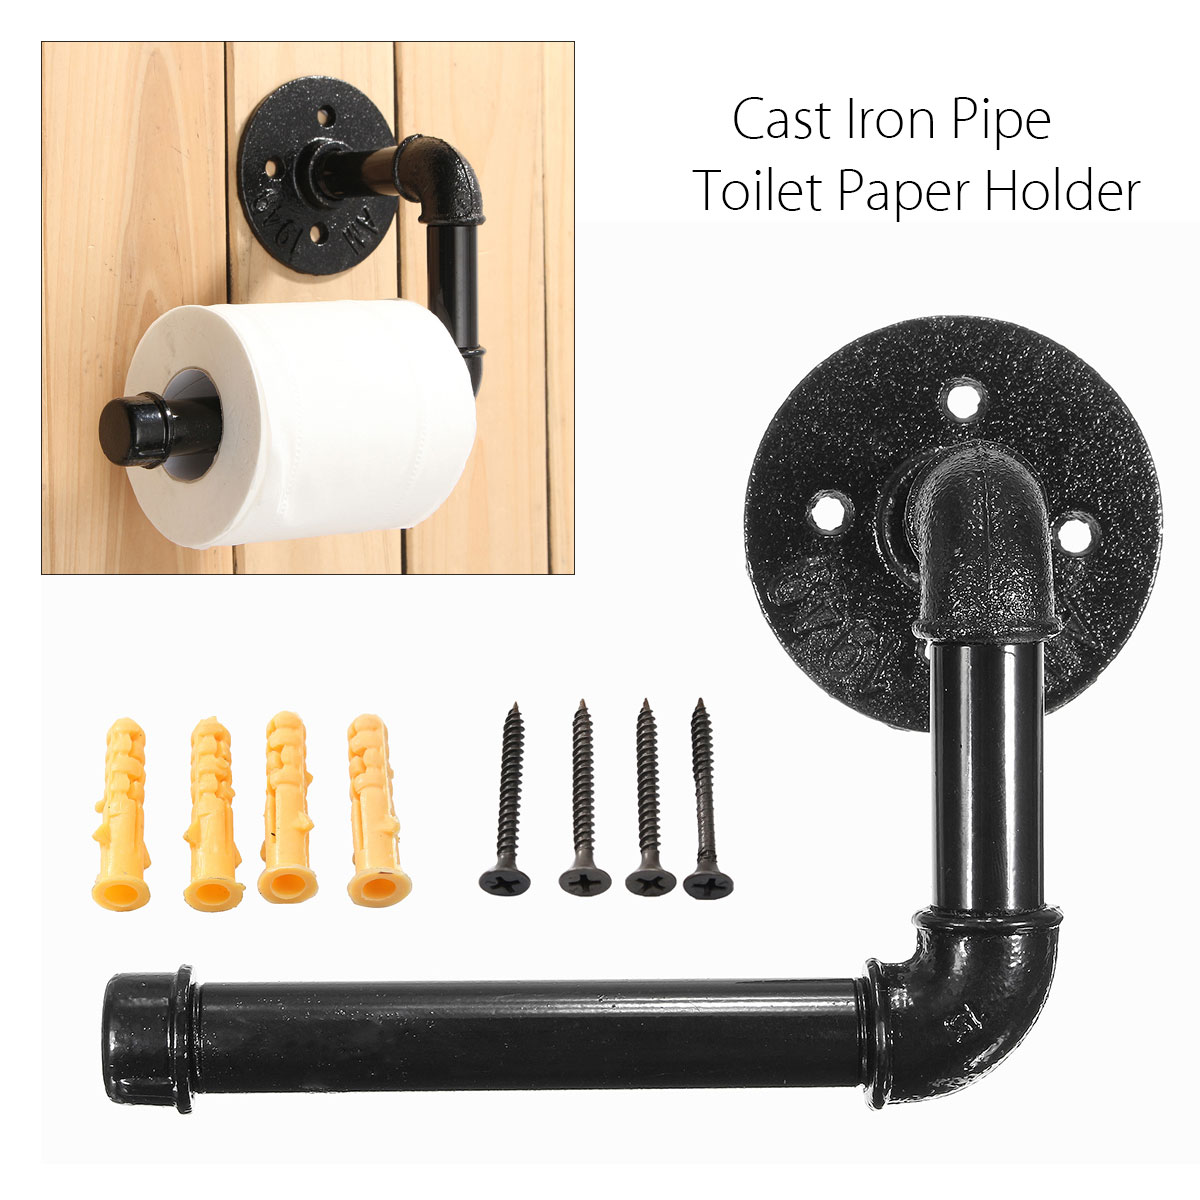 Industrial-Rustic-Style-Iron-Pipe-Wall-Mount-Toilet-Tissue-Paper-Roll-Holder-Towel-Bar-1226340-5